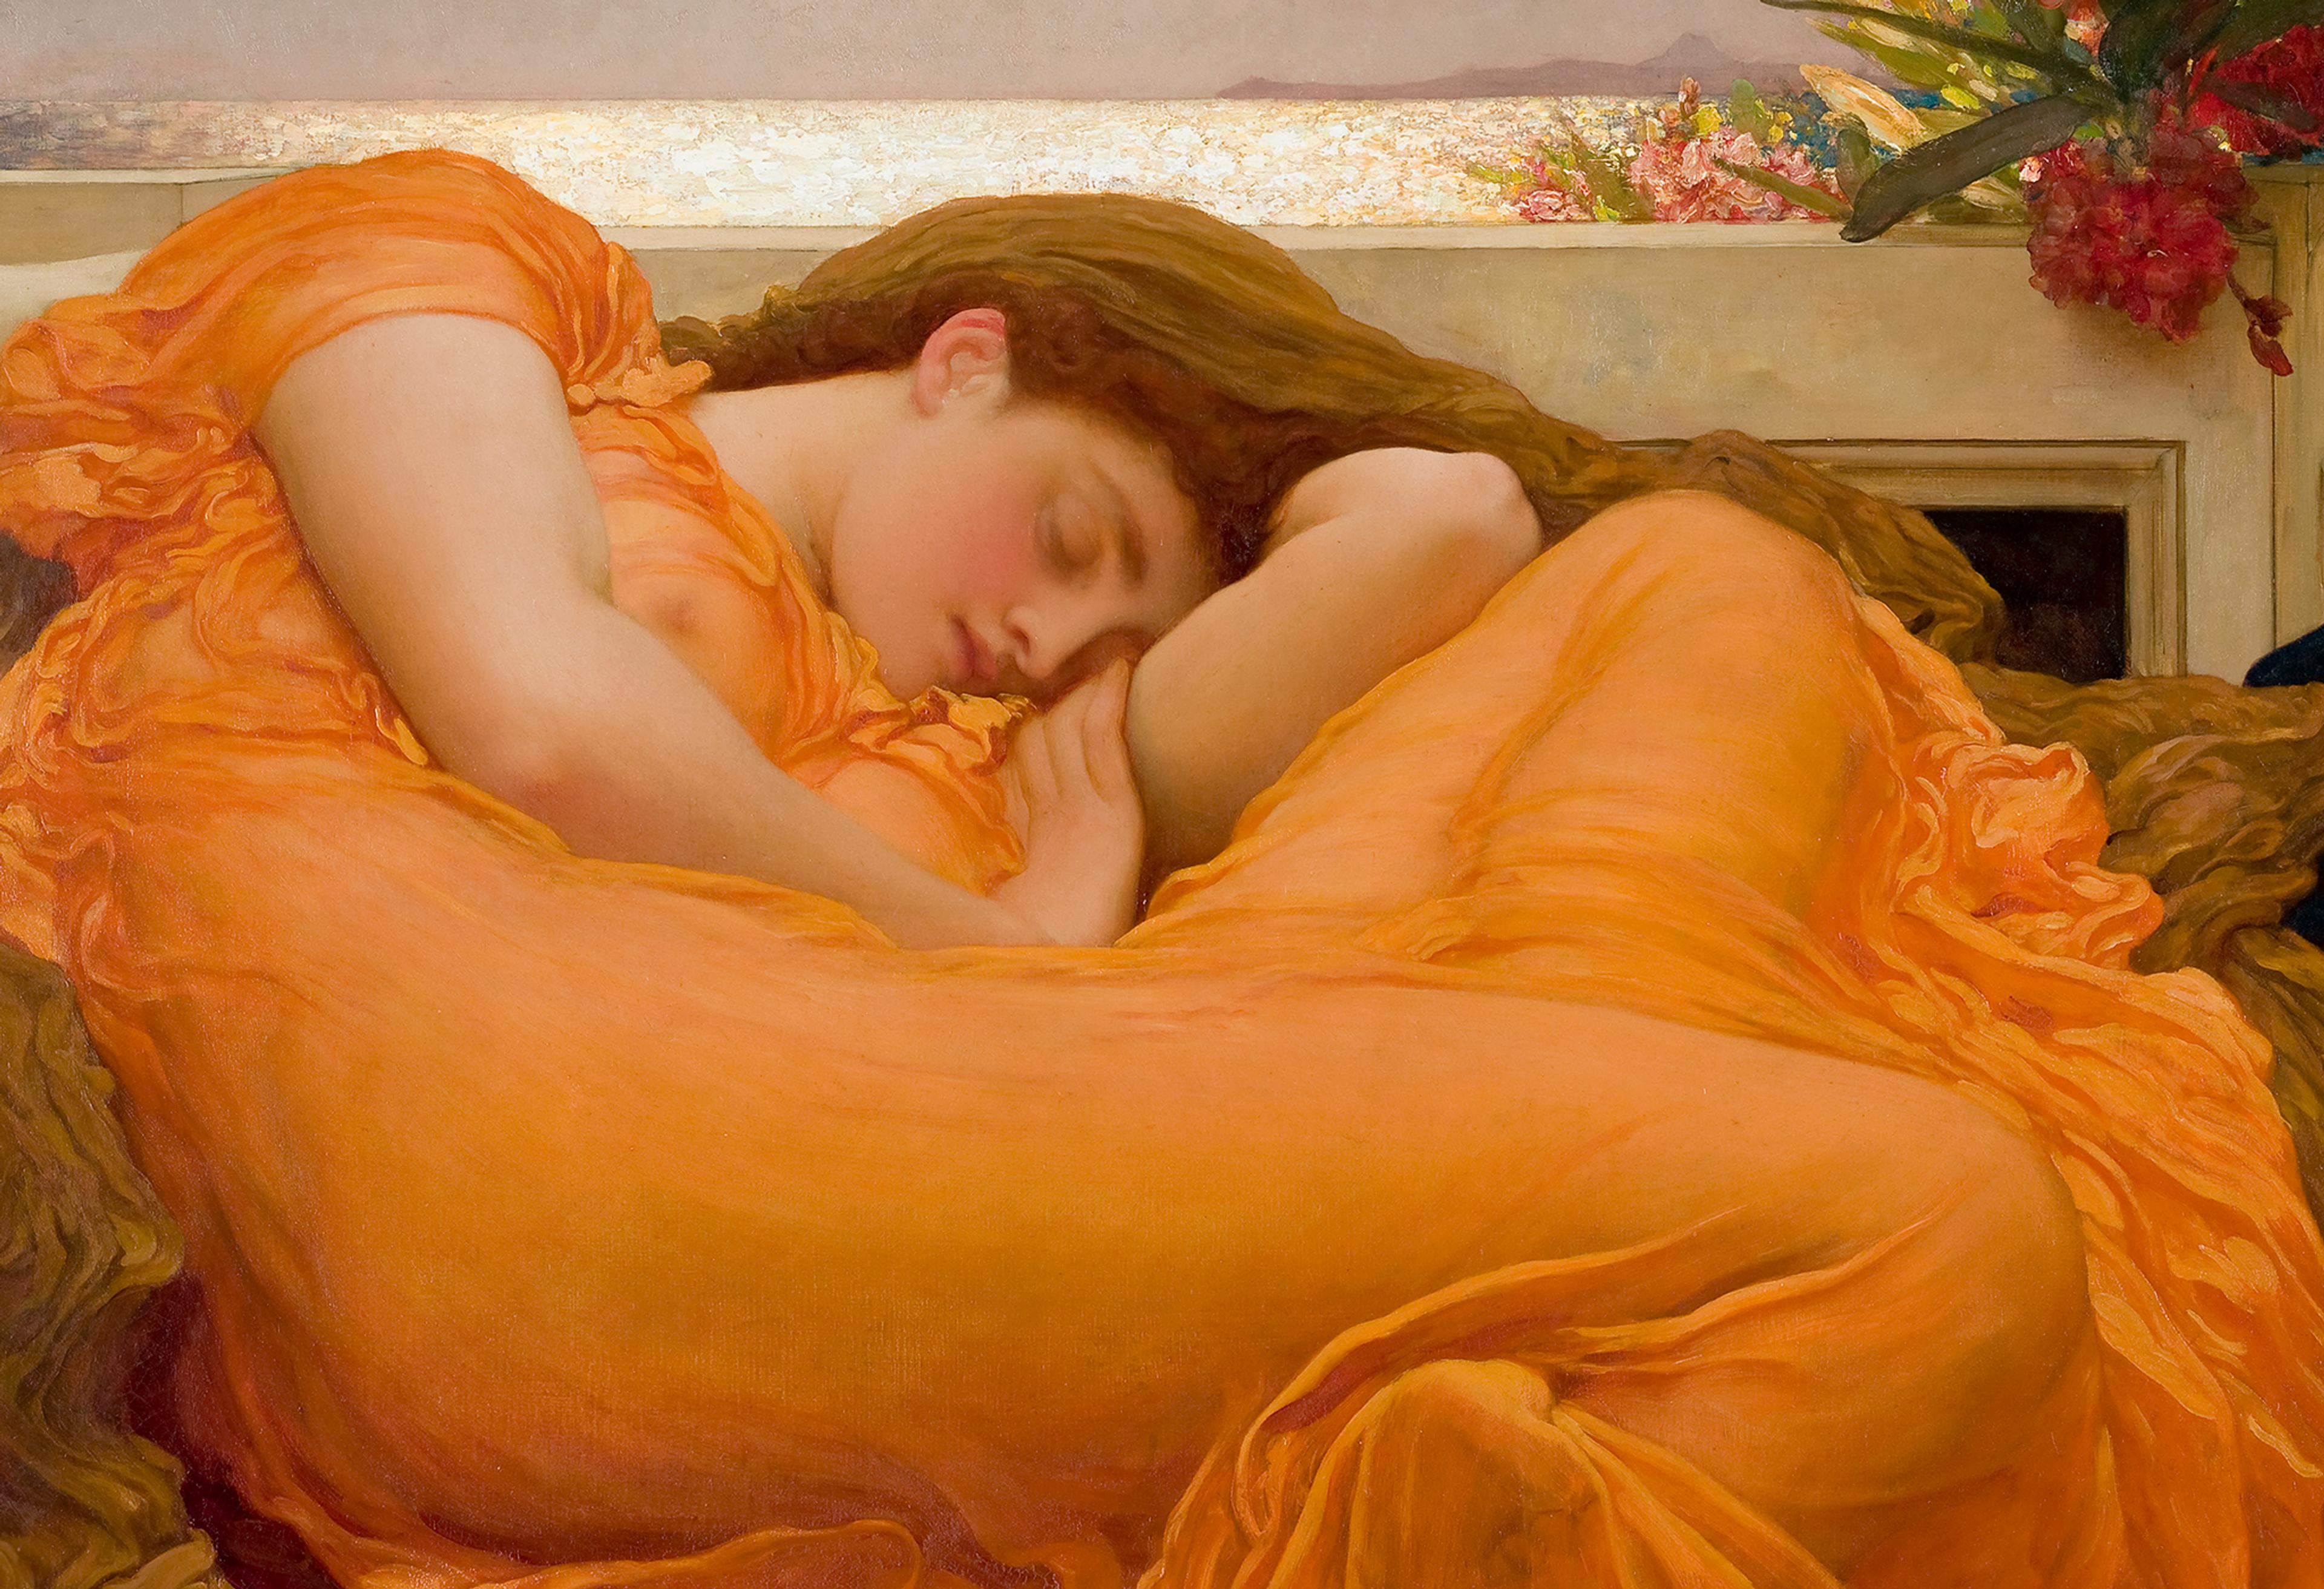 realistic painting of a white women with reddish hair sleeping in a curled up position on a large comfortable looking surface that has maroon red and brown clothe on it. The women is wearing a broad orange dress that is fairly transparent so the outline of her body is prominent. Behind her is a wall and behind that wall is a sunlit reflective body of water with a clear sky. A bright red flower creeps above the wall right above her.